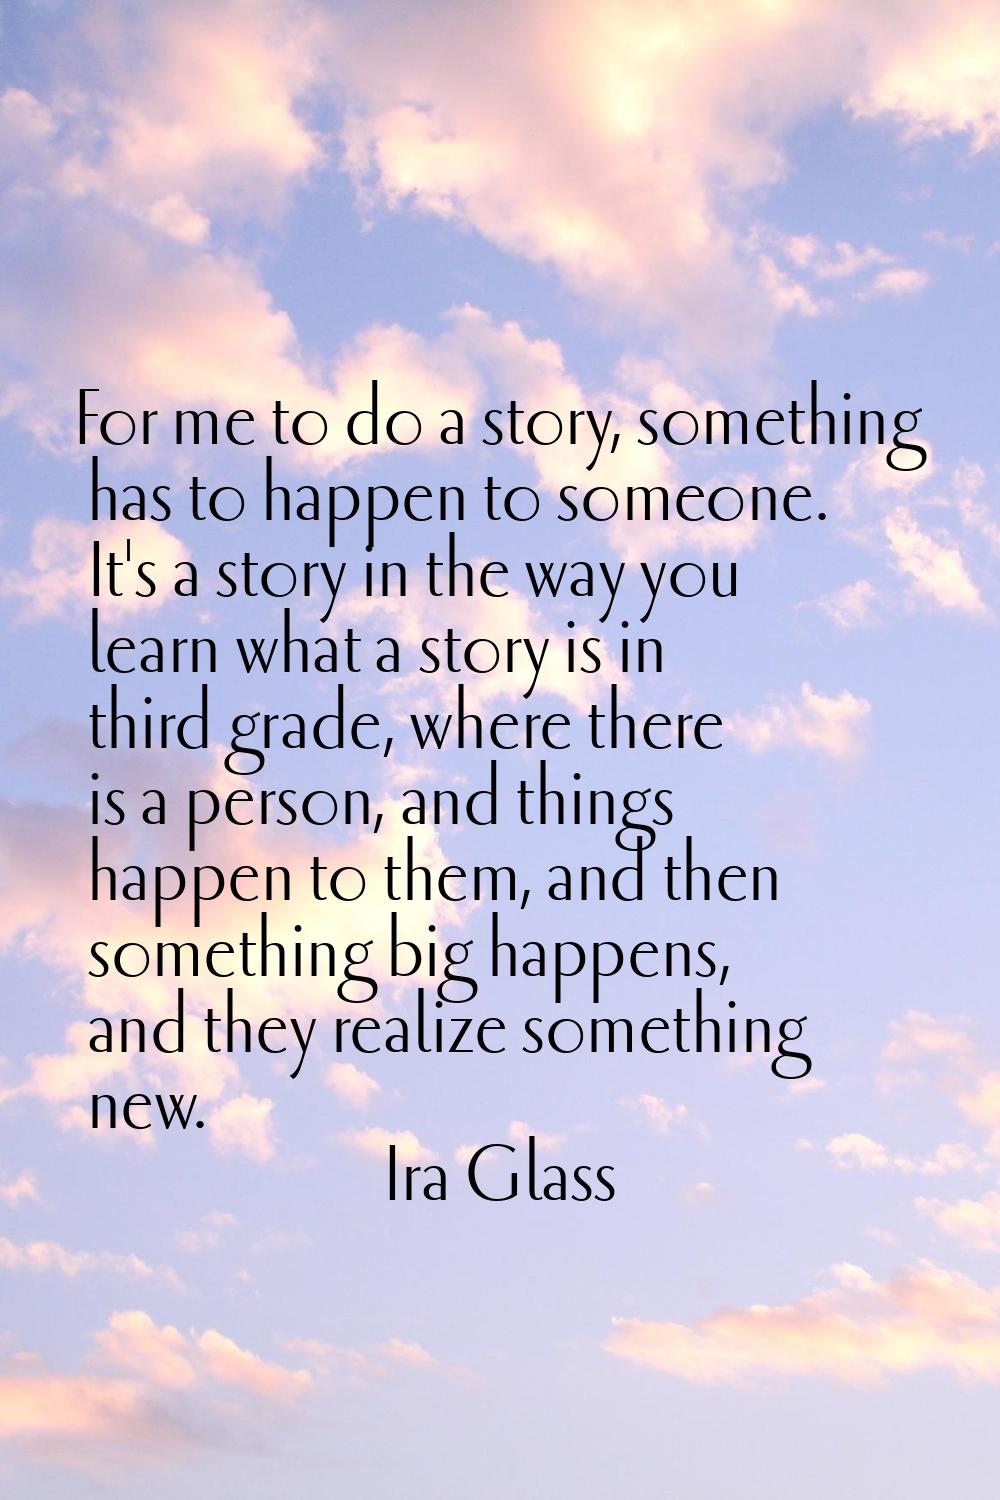 For me to do a story, something has to happen to someone. It's a story in the way you learn what a 